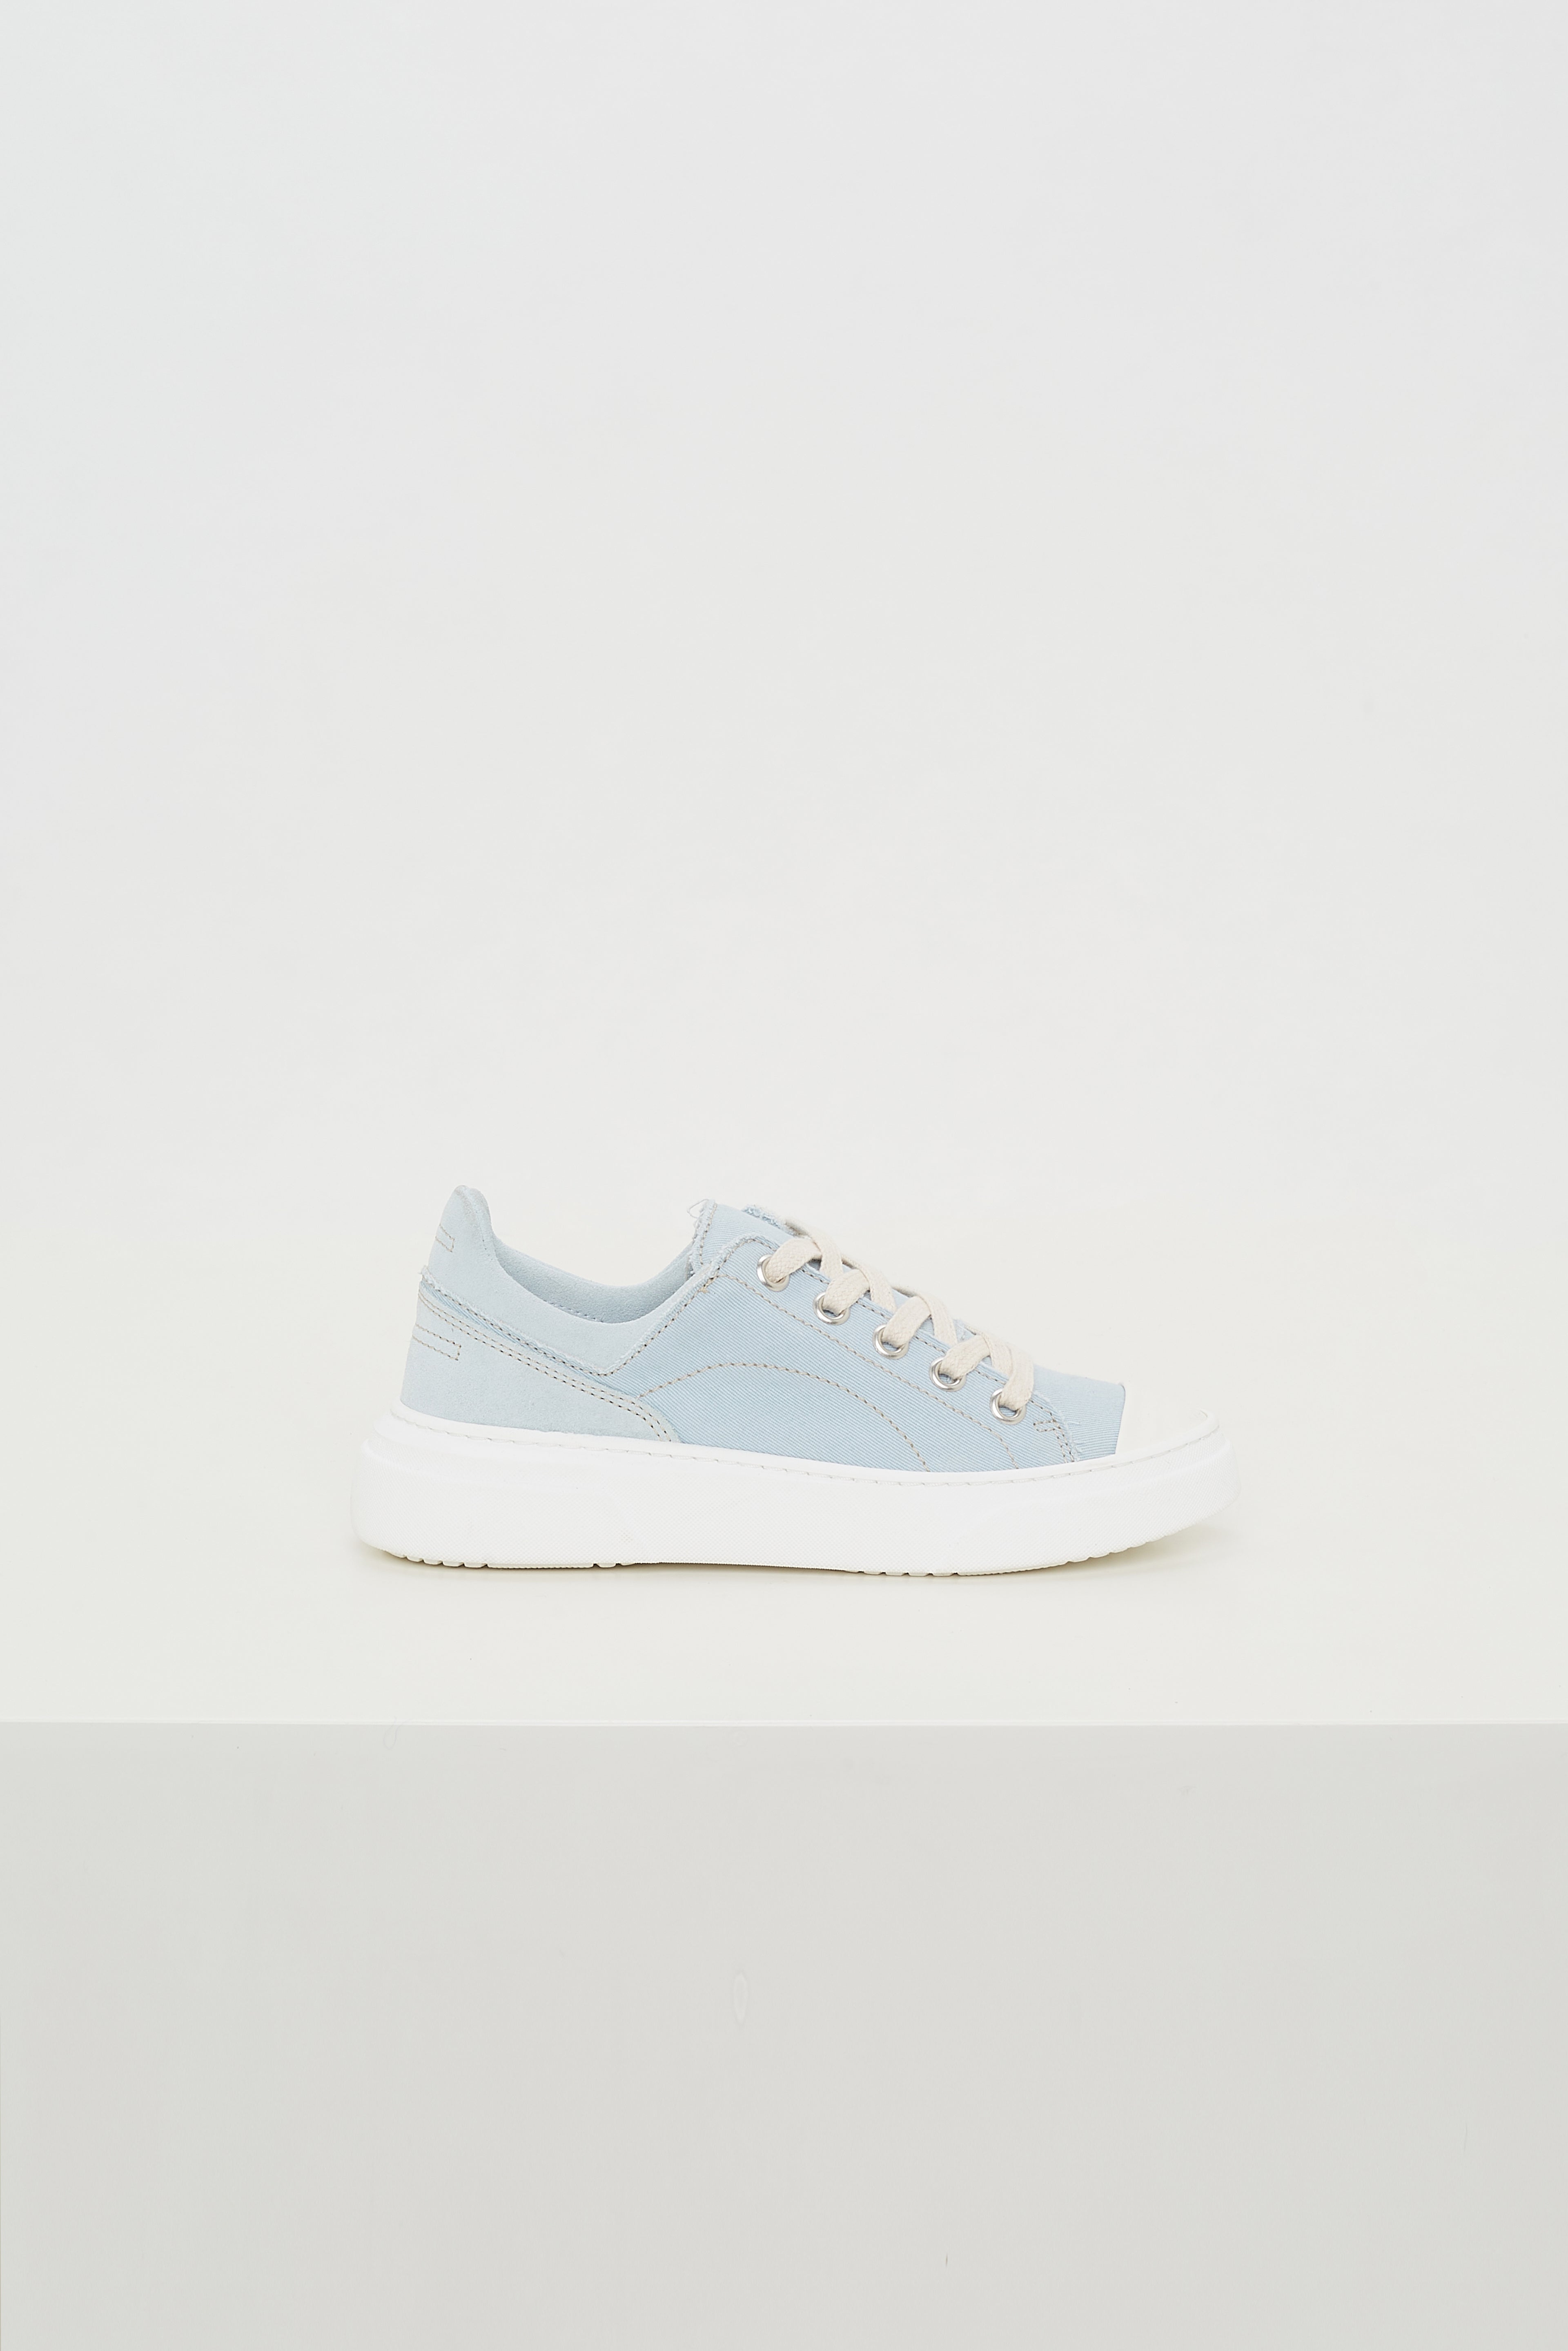 Dorothee-Schumacher-OUTLET-SALE-CANVAS-COOLNESS-Sneaker-Schuhe-2_8ed0eb82-f537-4bc6-9b60-70452aa4fcde.jpg